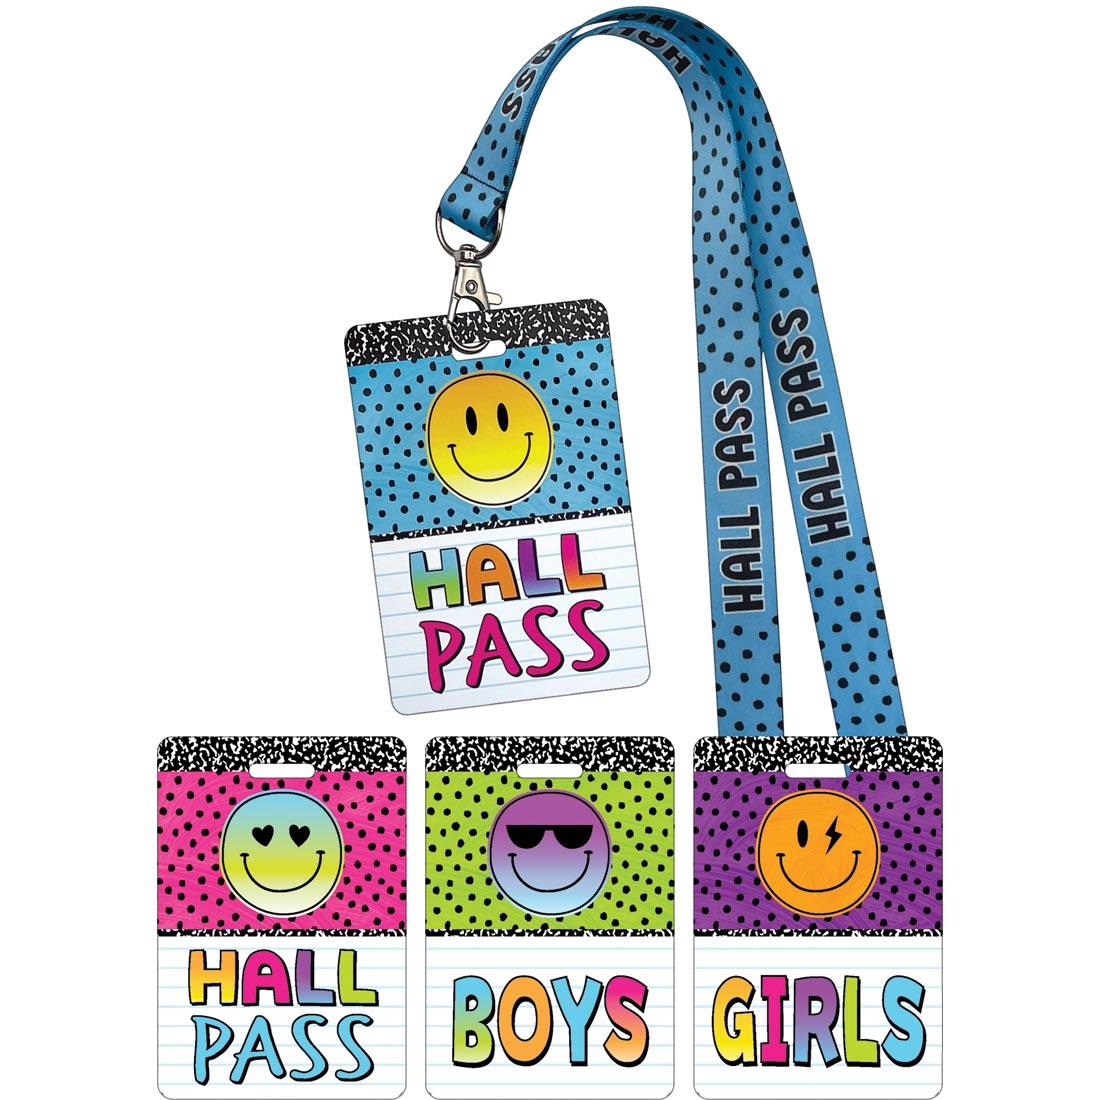 Hall Pass Lanyards from the Brights 4Ever collection by Teacher Created Resources